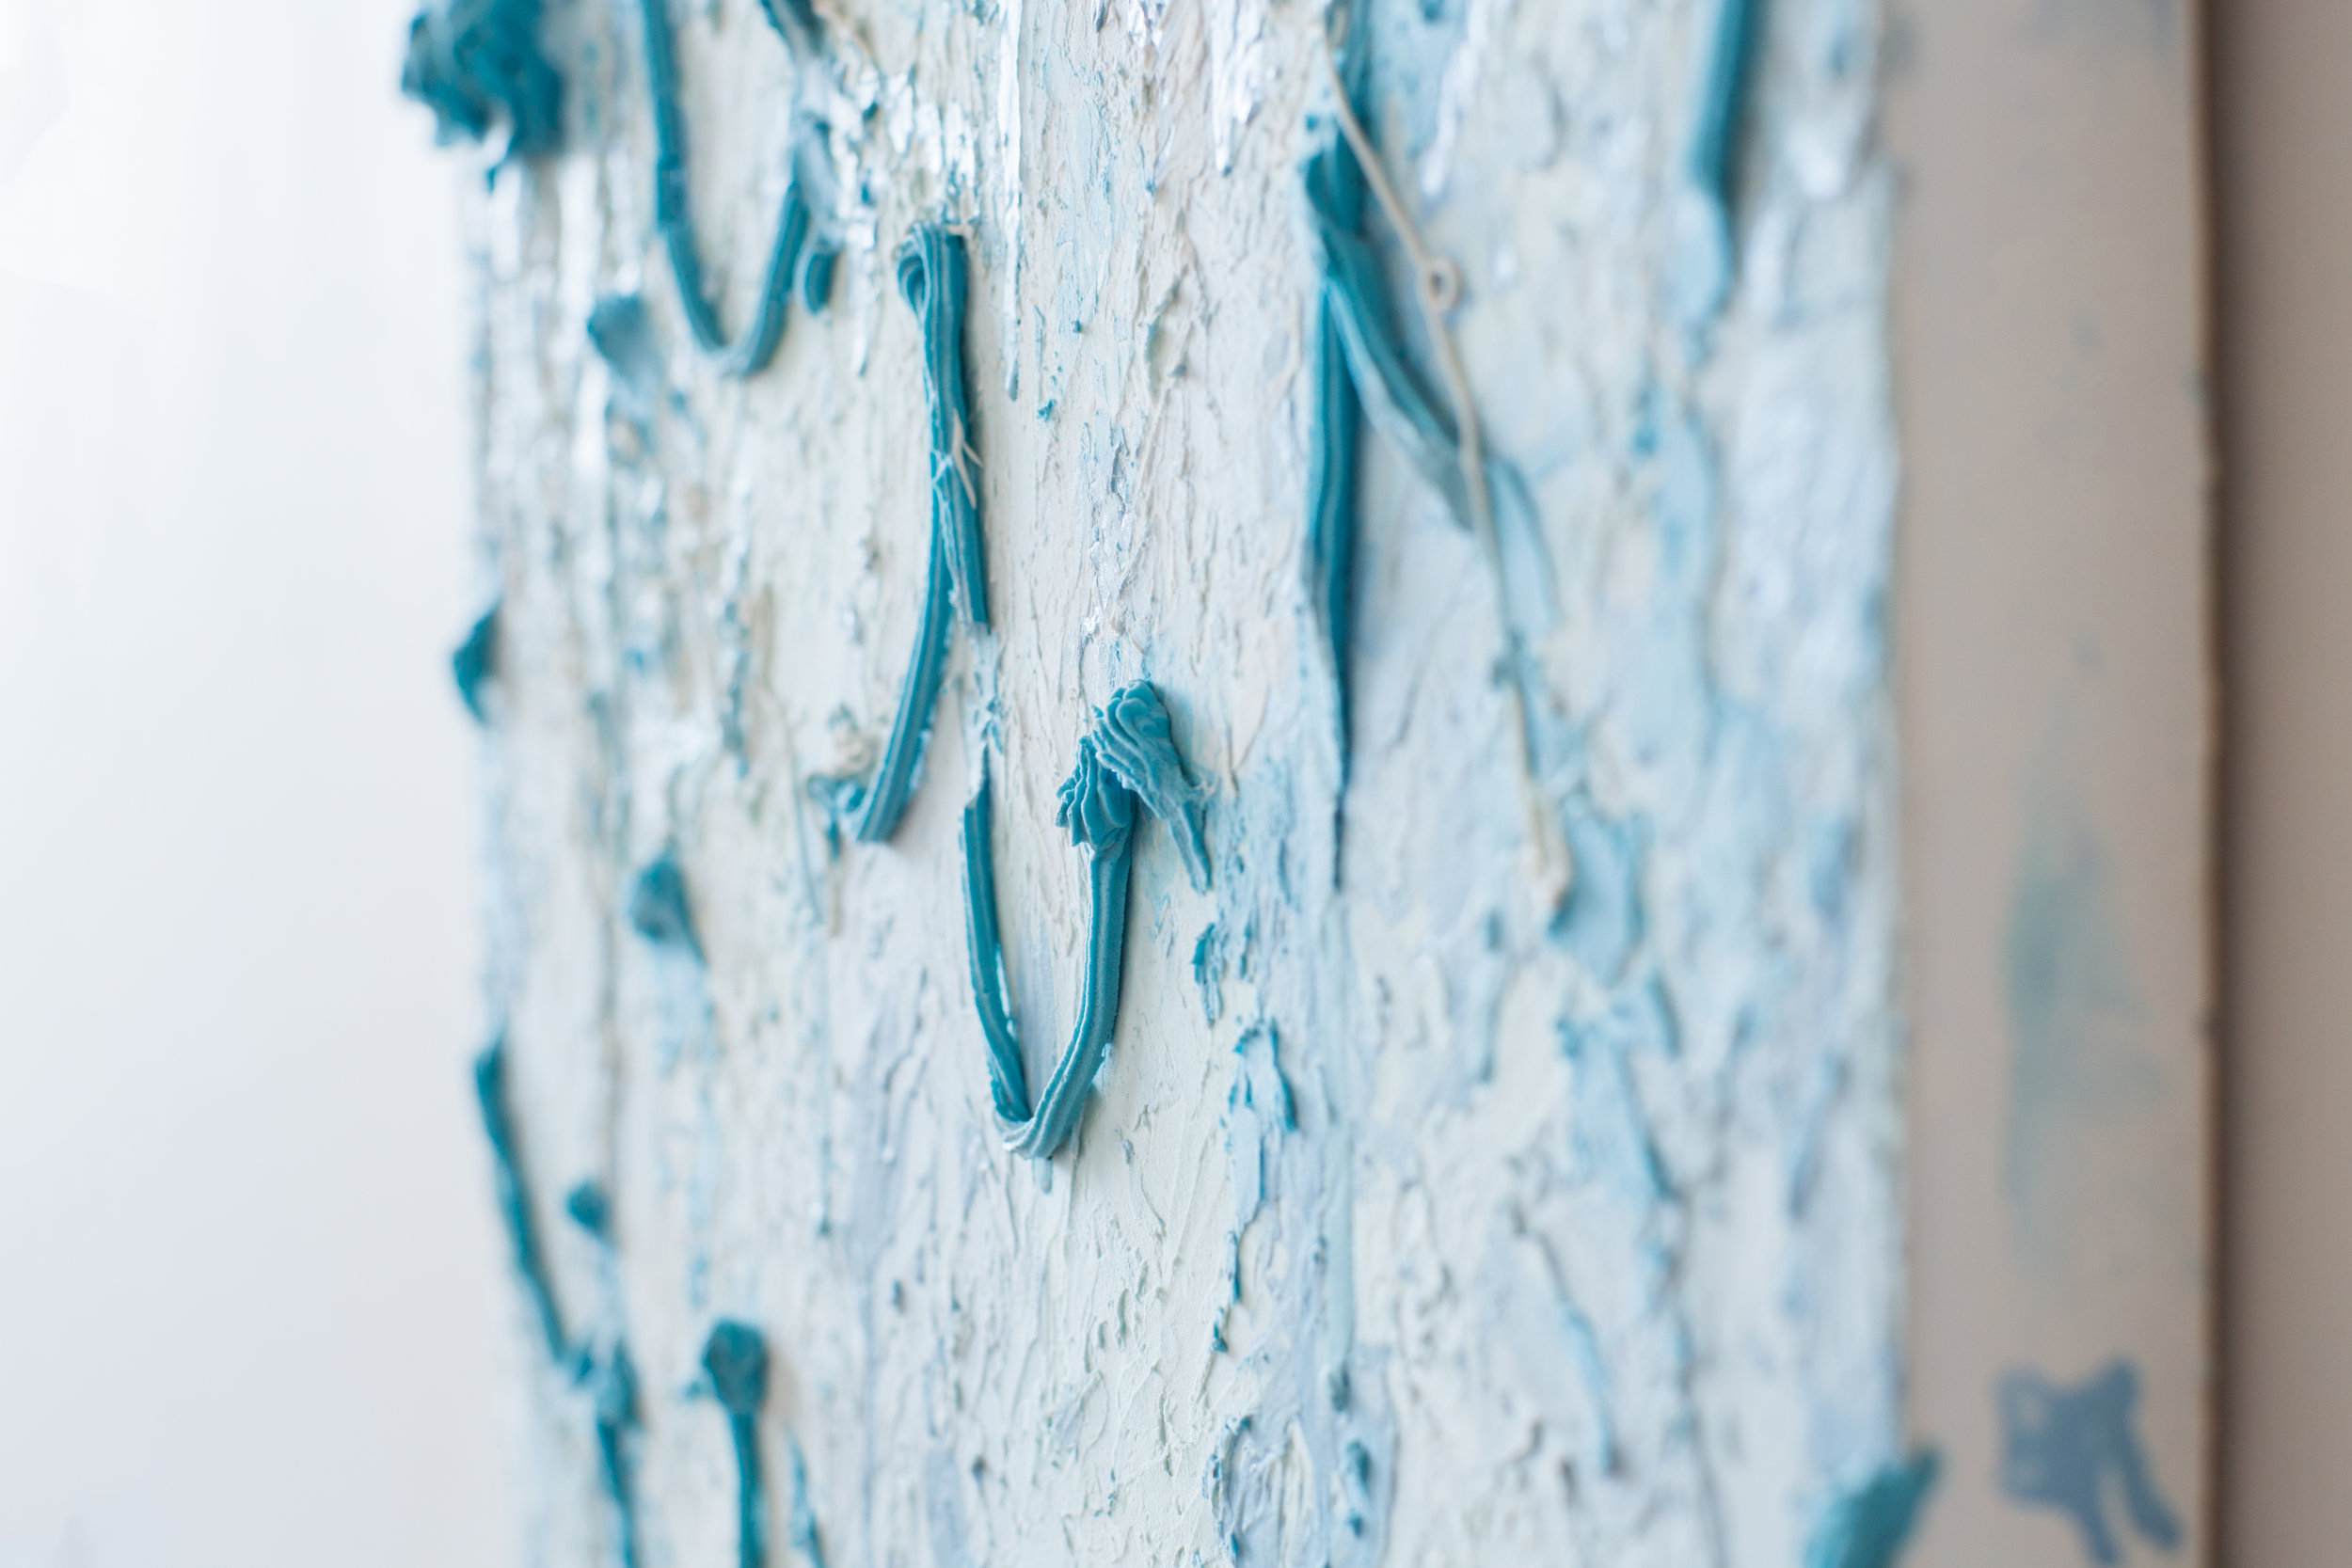   Blue Experiment No. 1 (Detail)   Mixed Media on Board  2013  Photo:  Julie Dietz Photography  